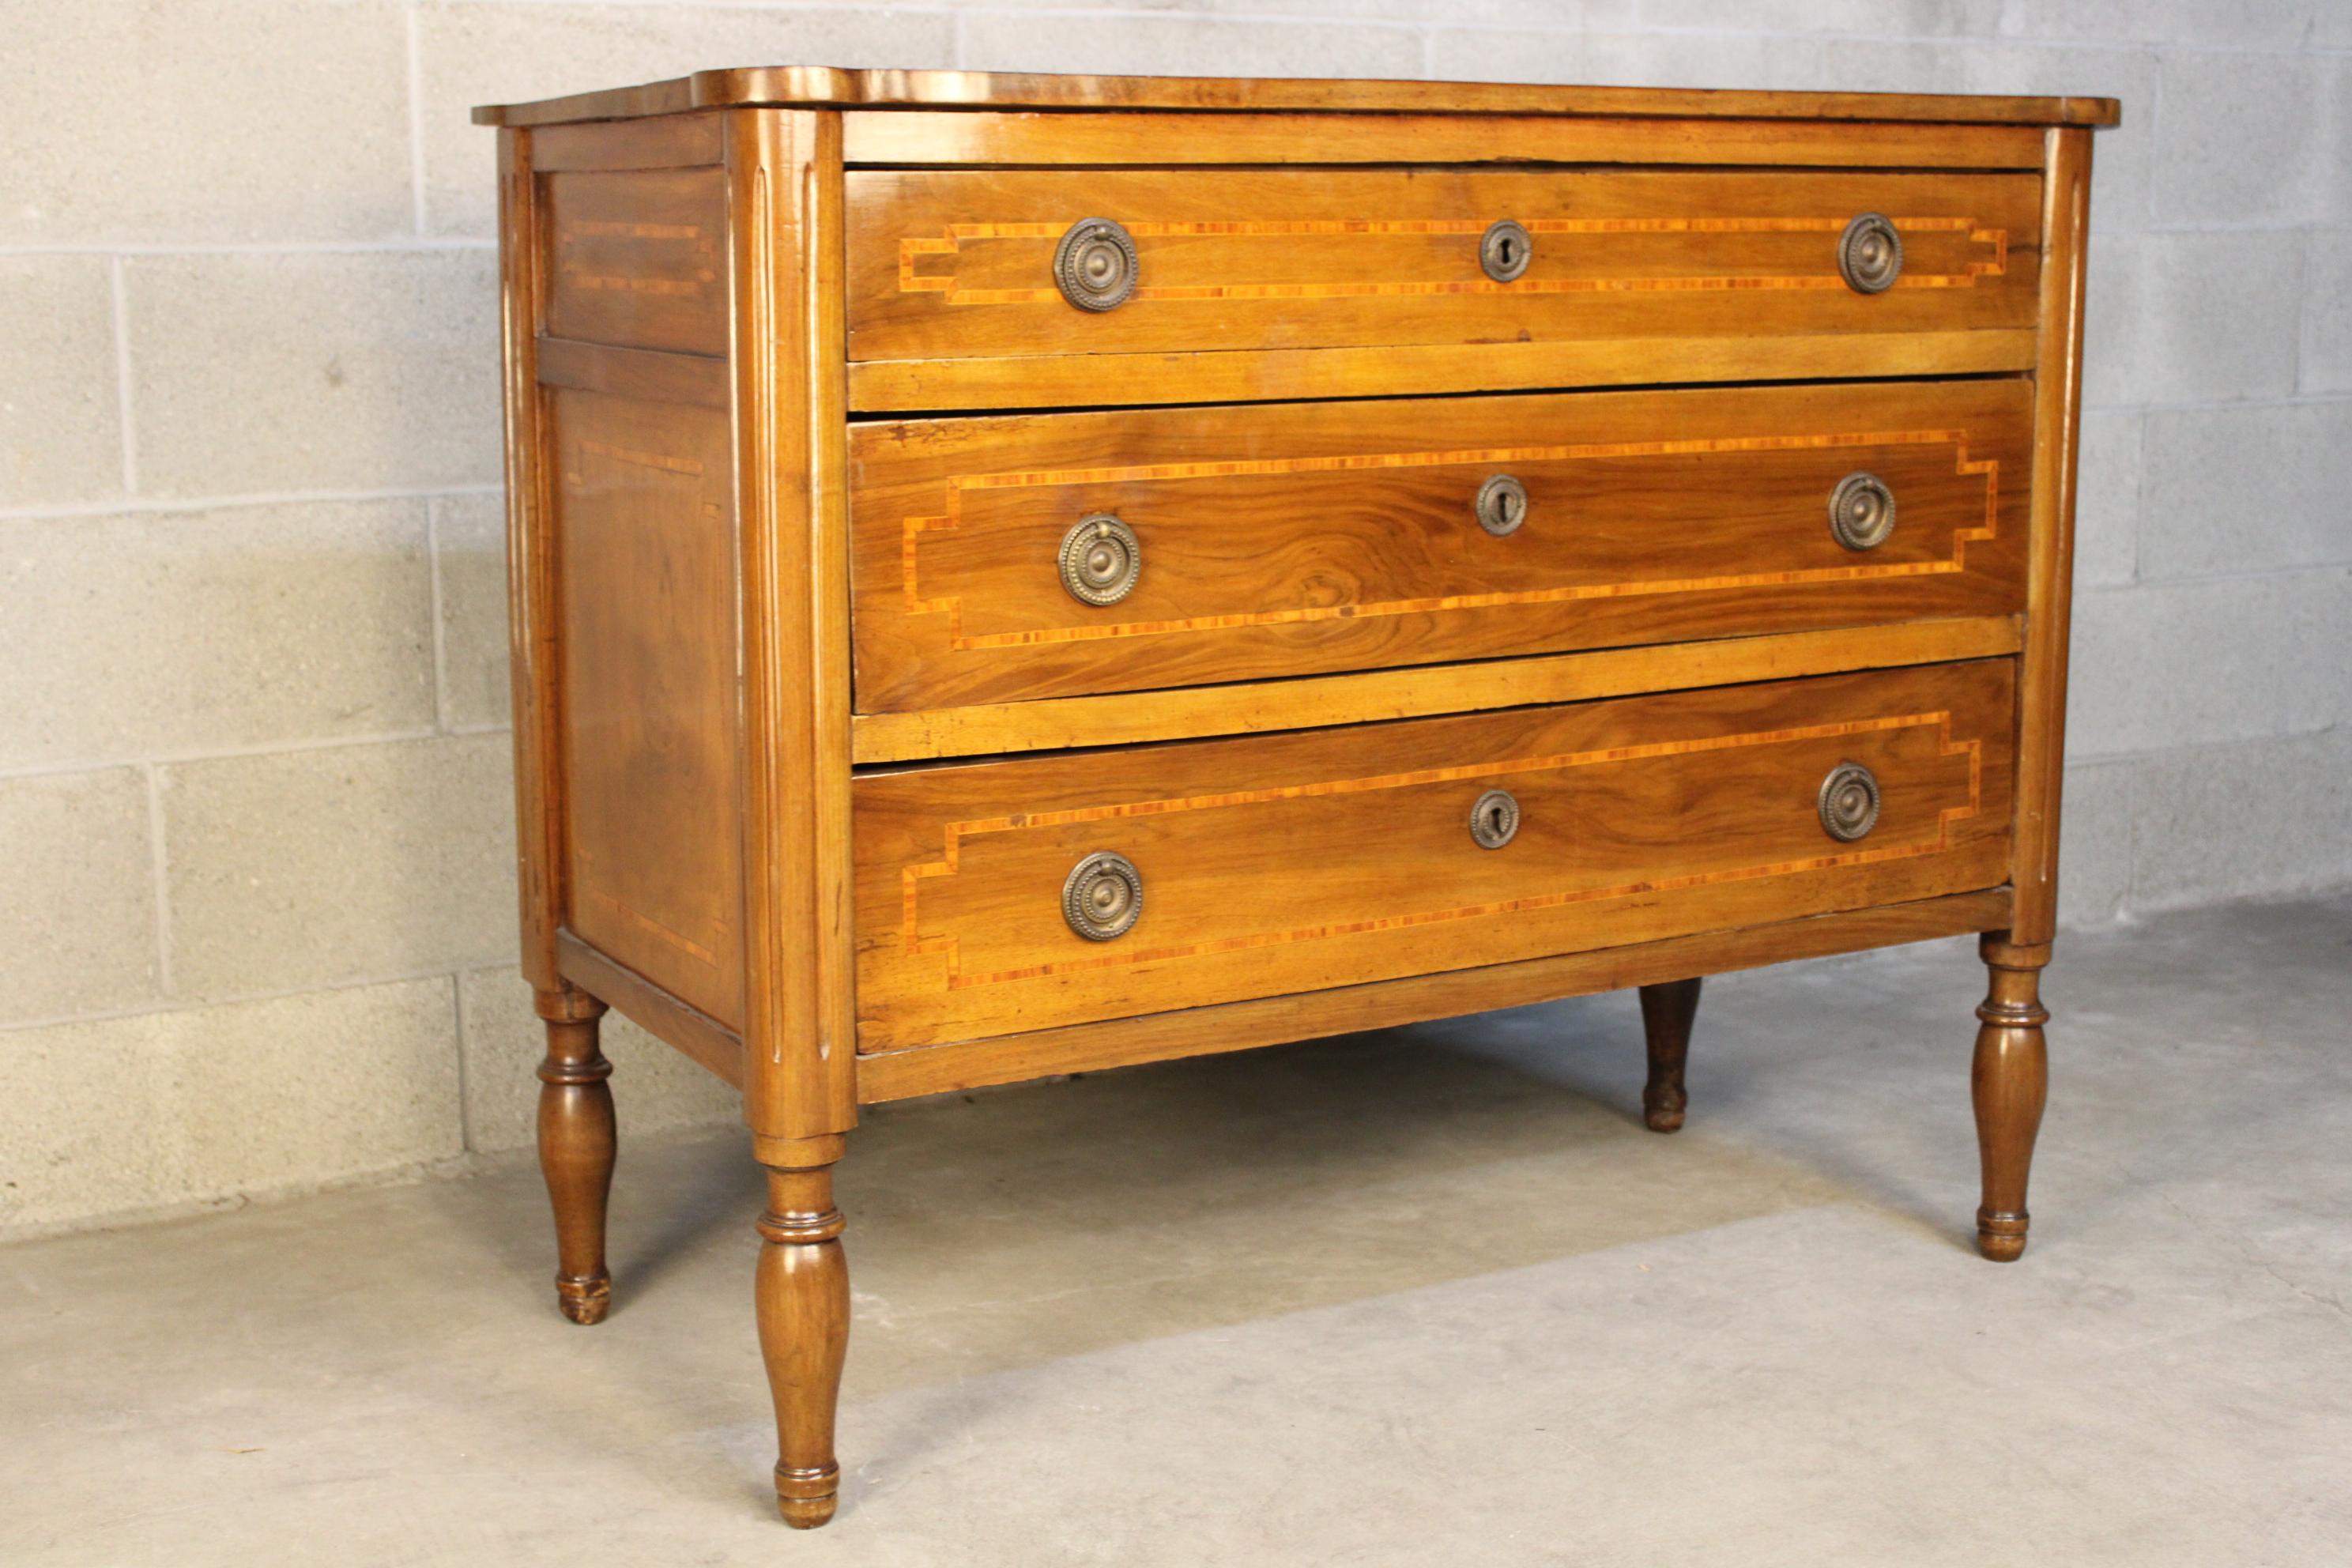 Do not miss this beautiful quality piece with a perfect price! 
Very elegant inlaid chest of drawers in walnut. original of the period of Louis XVI about 1780 France. generally in good condition. Structure is very strong and solid. No need any